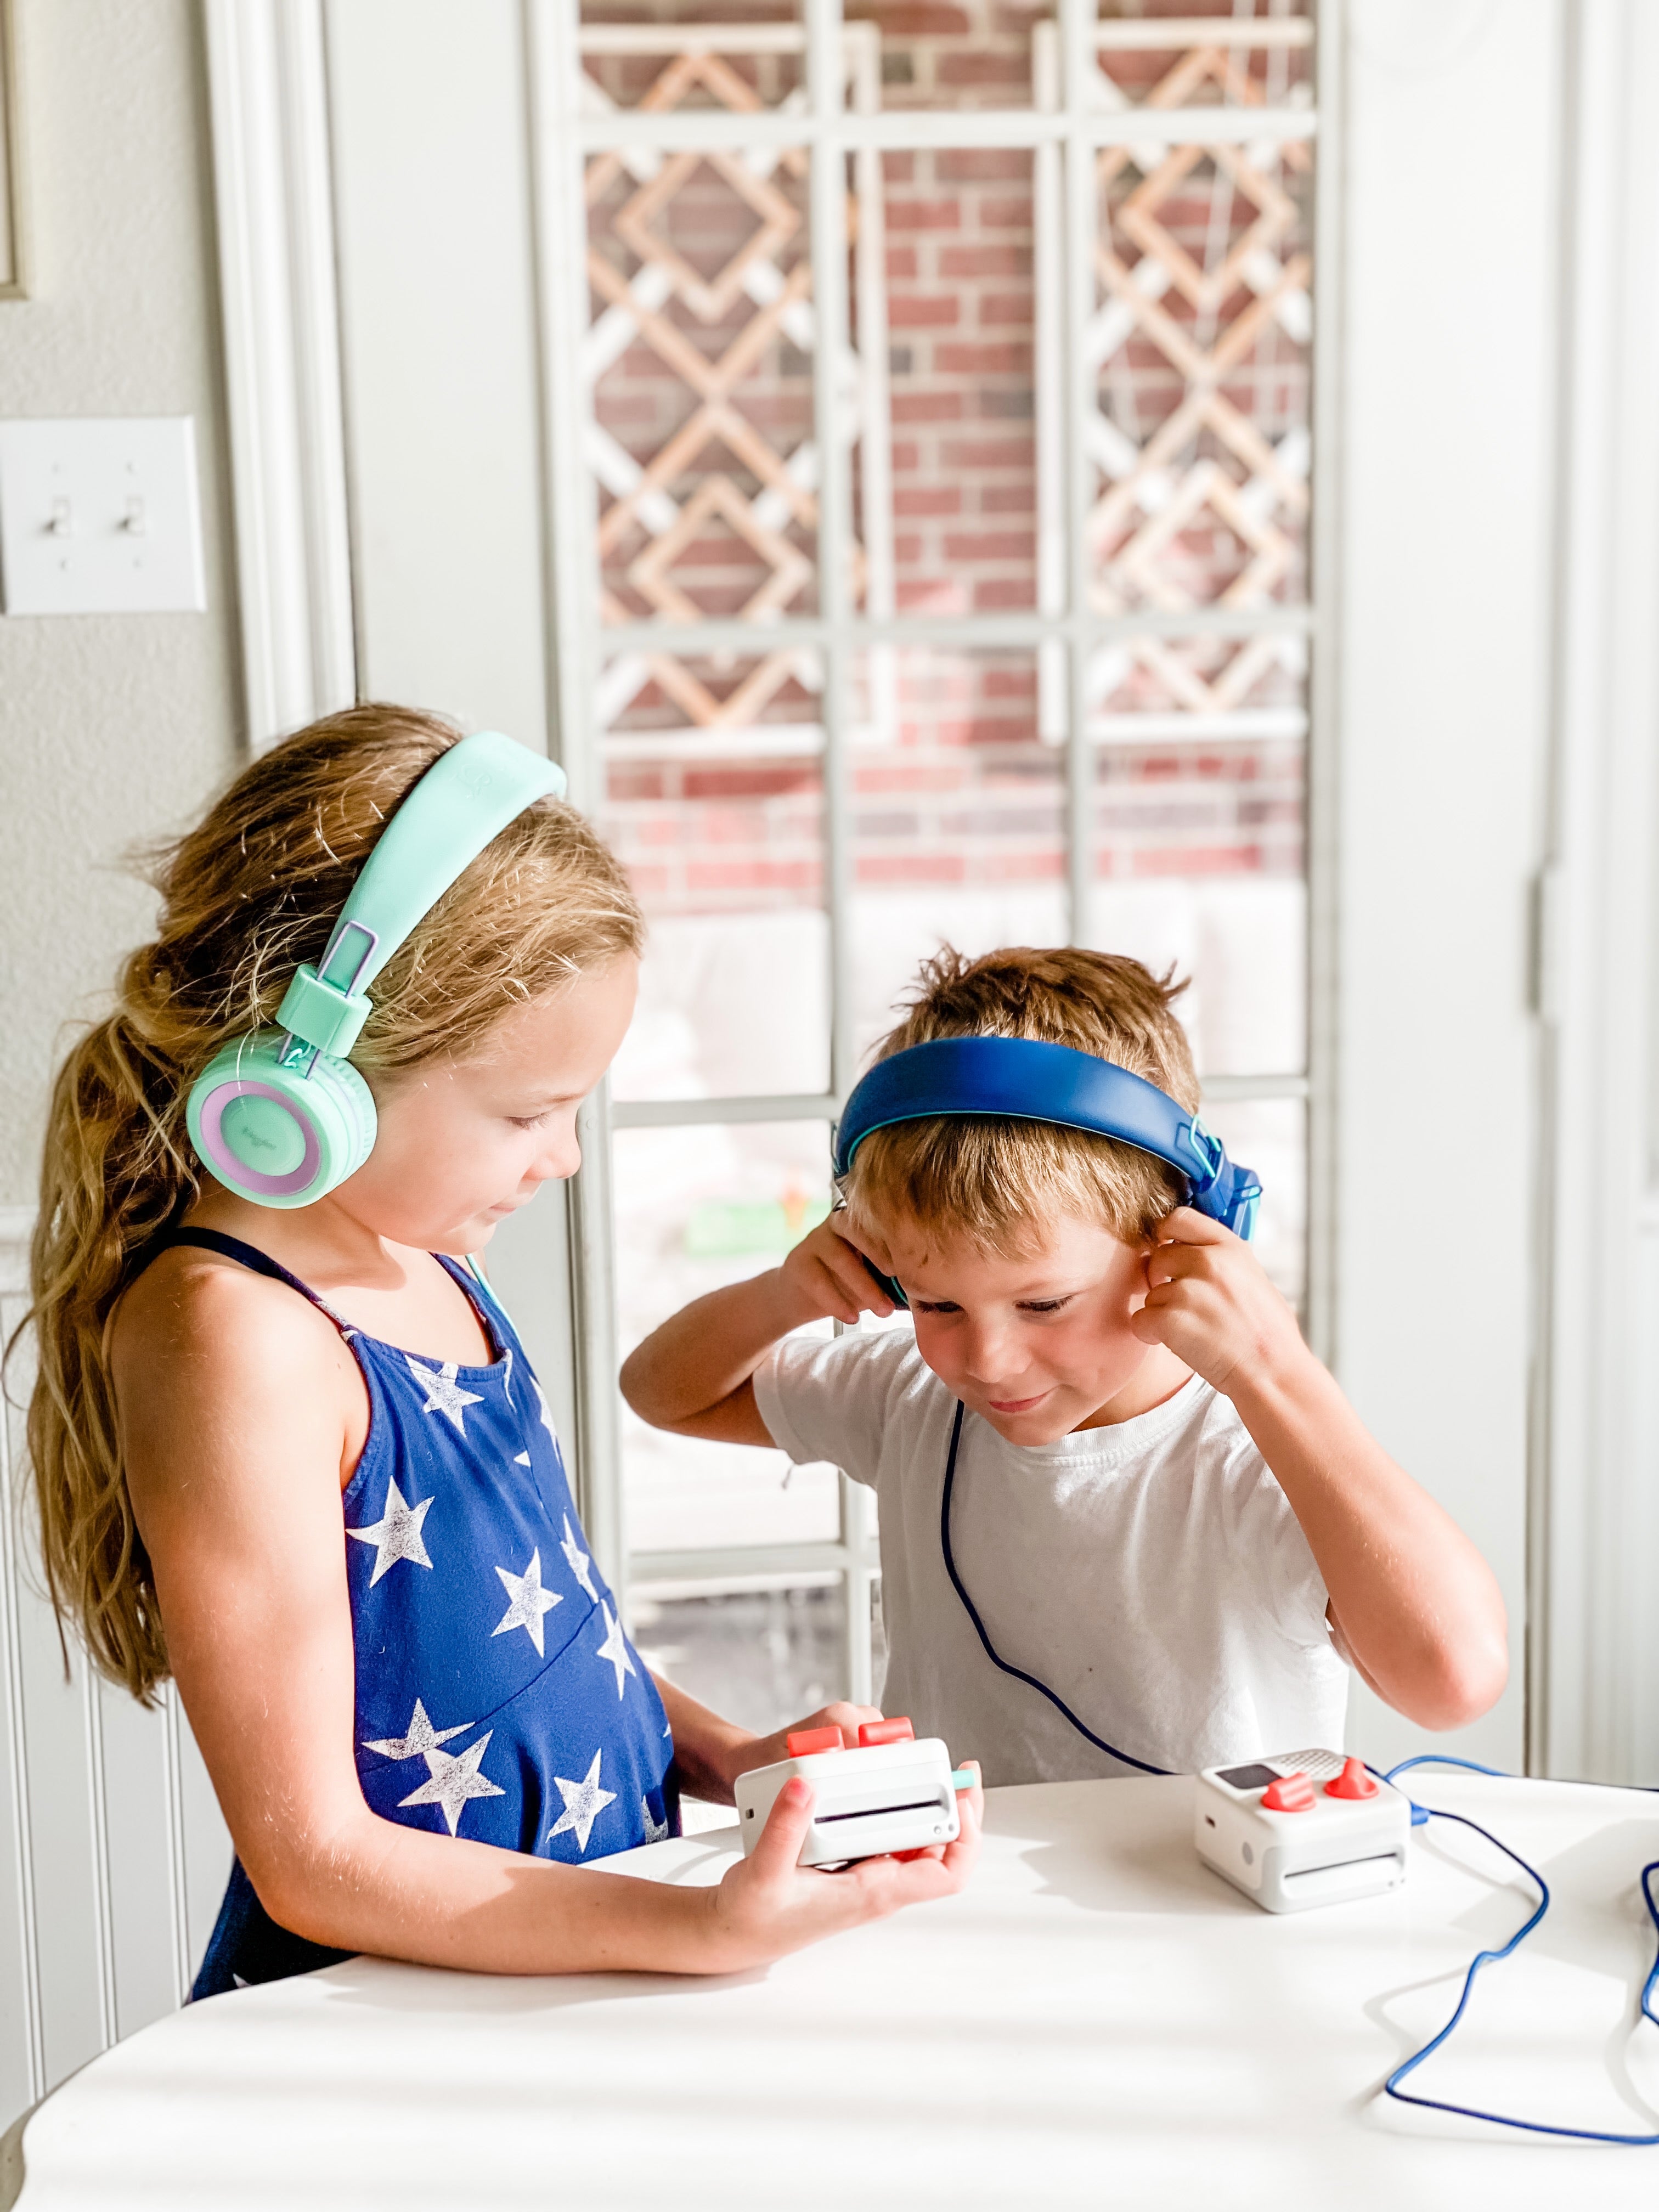 Yoto audio player lets kids listen - South African Mom Blogs